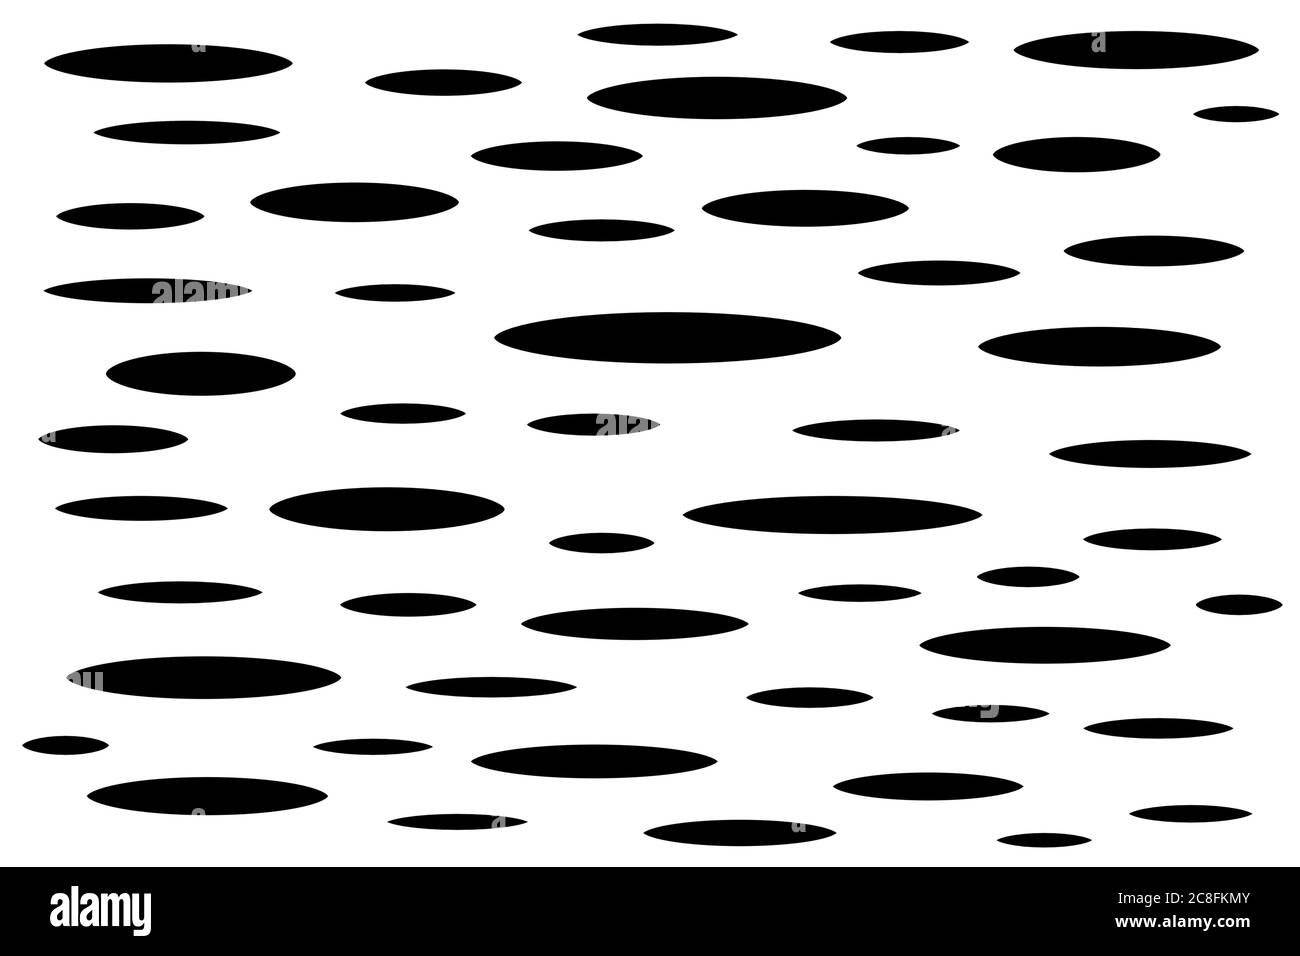 Black spotted background pattern, horizontal black oval shapes on white background for packaging, fabric, wallpaper, textile material and print Stock Photo